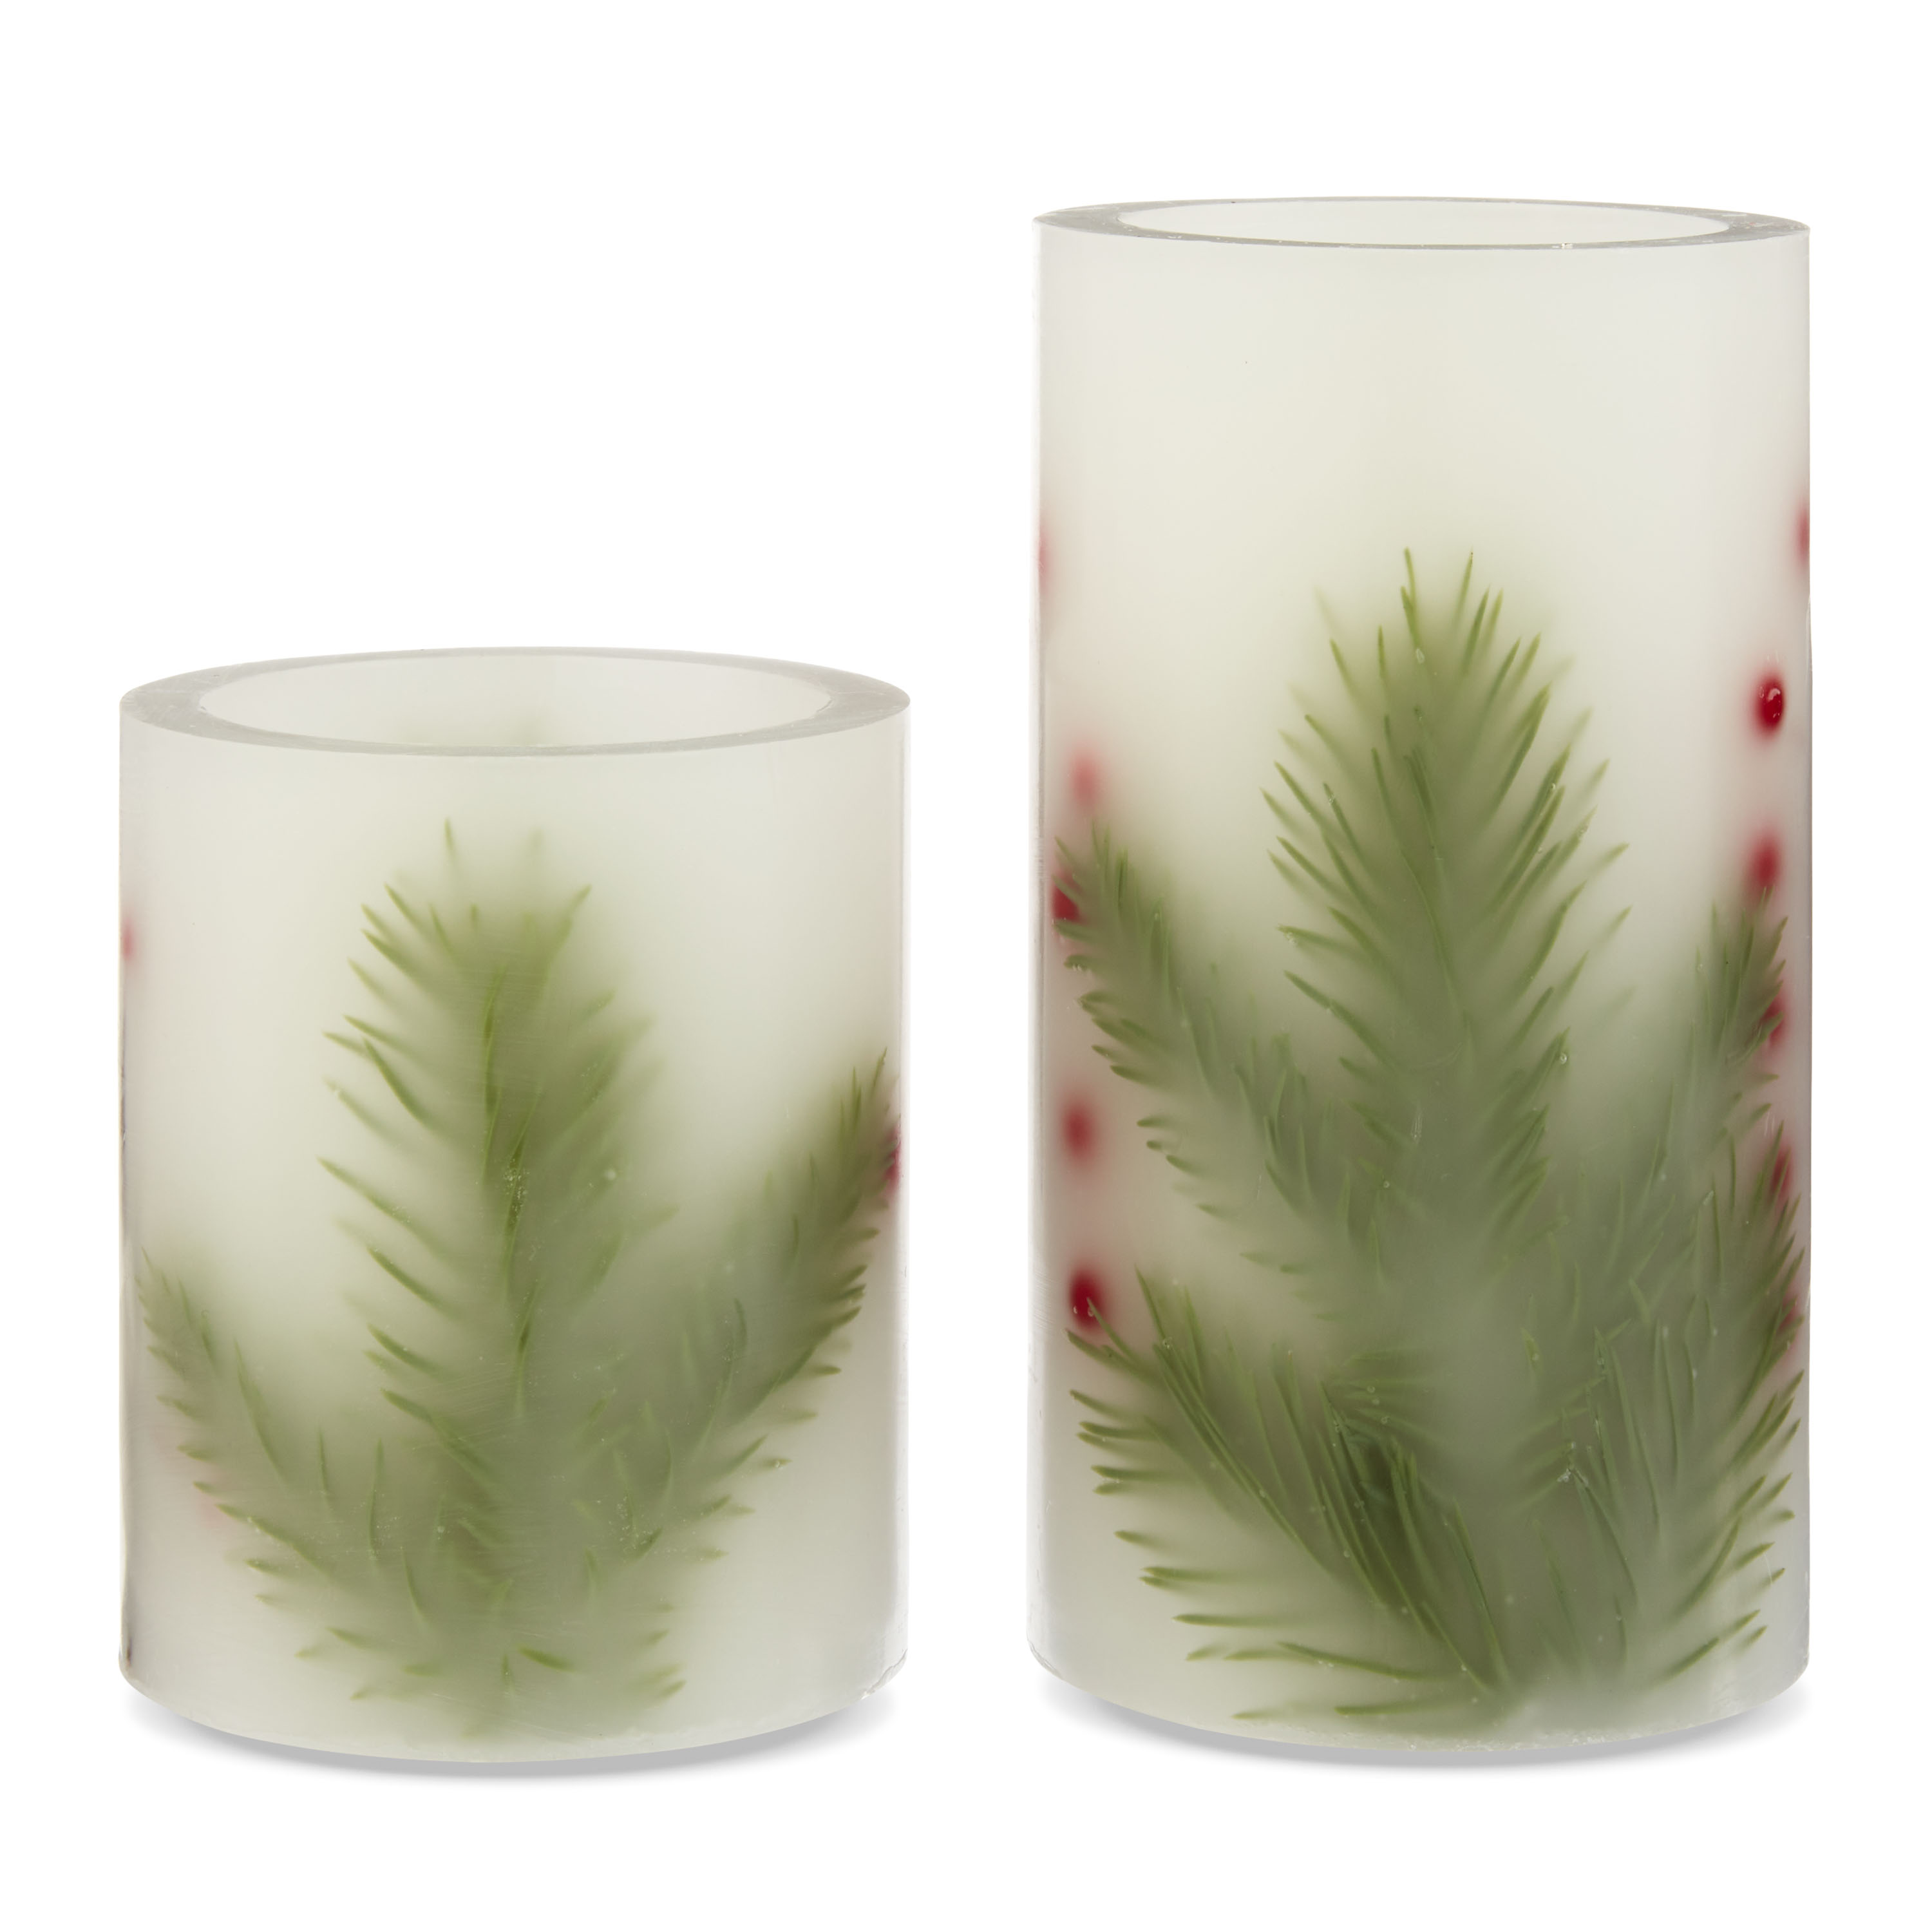 Holiday Time 3.25x4 and 3.25x6 inch Led Flameless Pillar Candles, White Unscented Wax with Red Berry&Evergreen ,Warm White Light,Set Pack - image 1 of 5